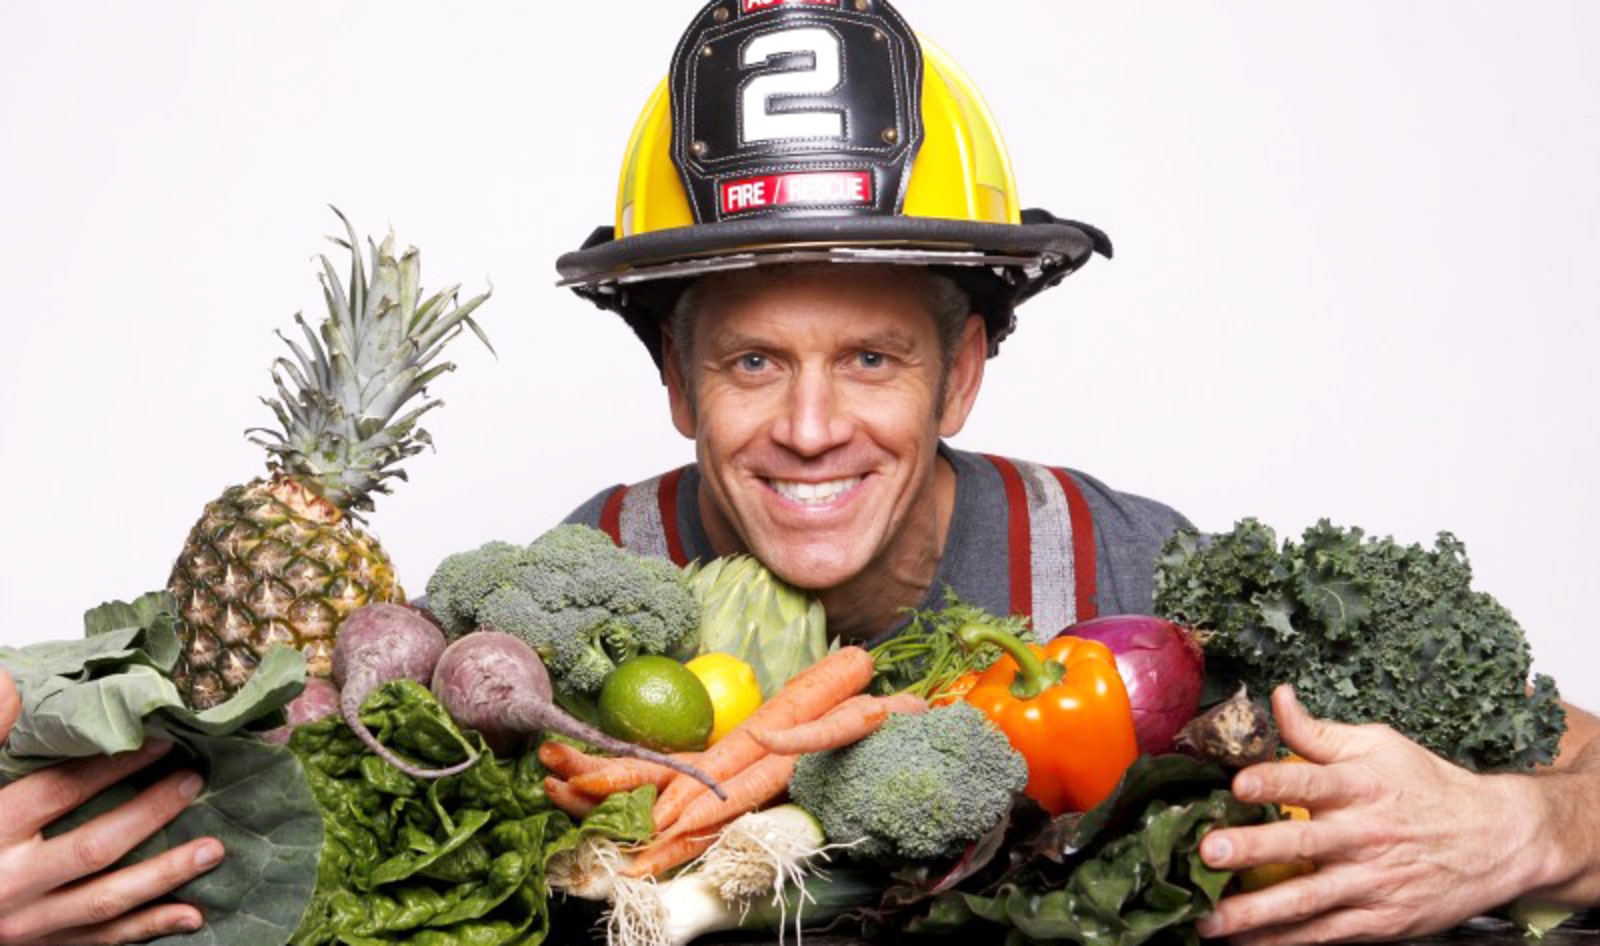 Vegan Firefighter Tours 25 Whole Foods to Promote Plant-Based Diet